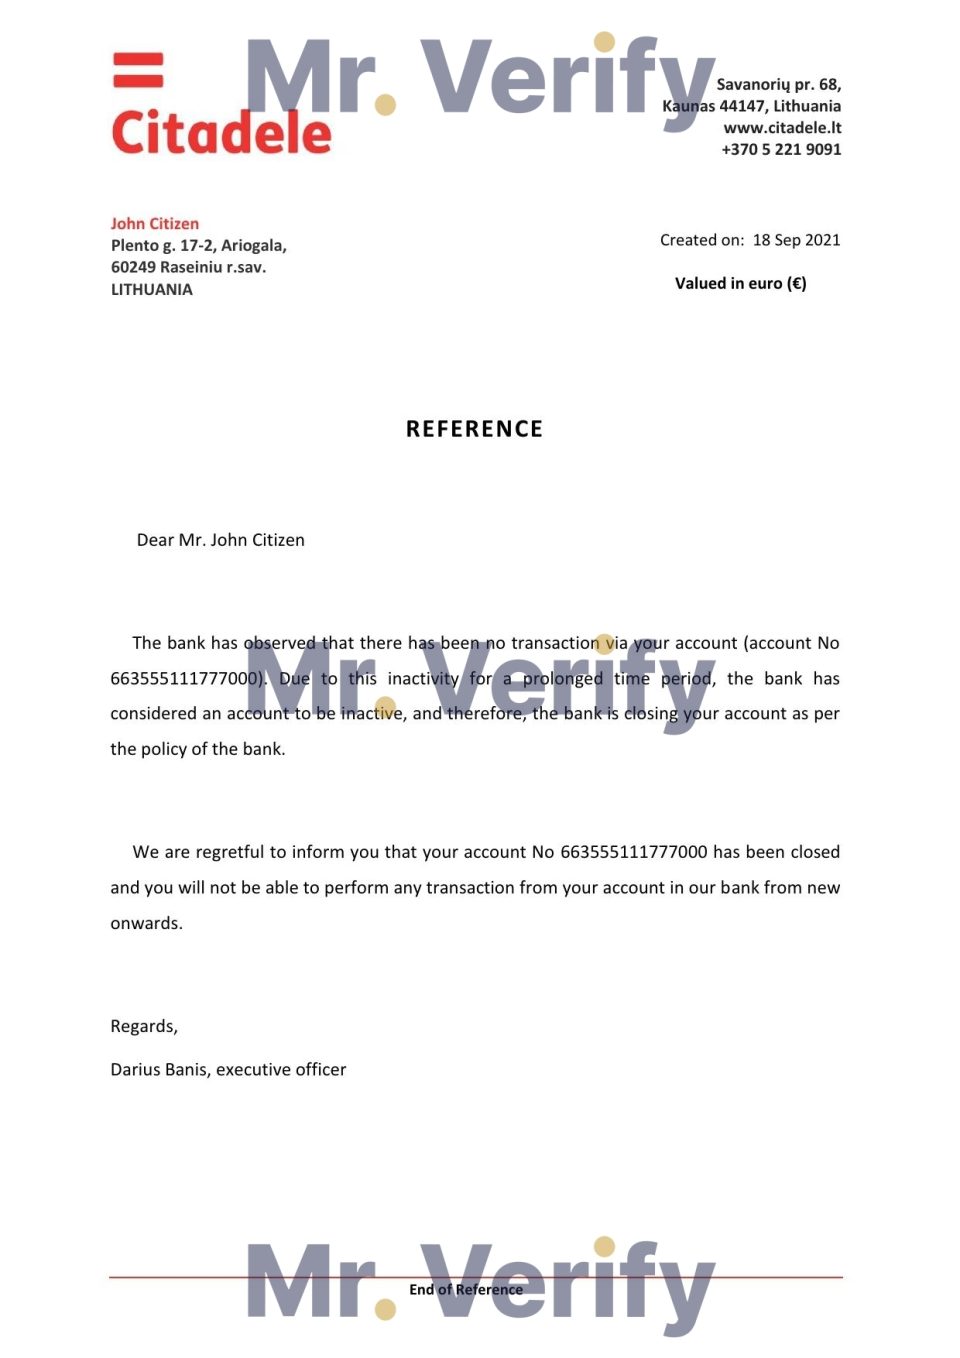 Download Lithuania Citadele Bank Reference Letter Templates | Editable Word